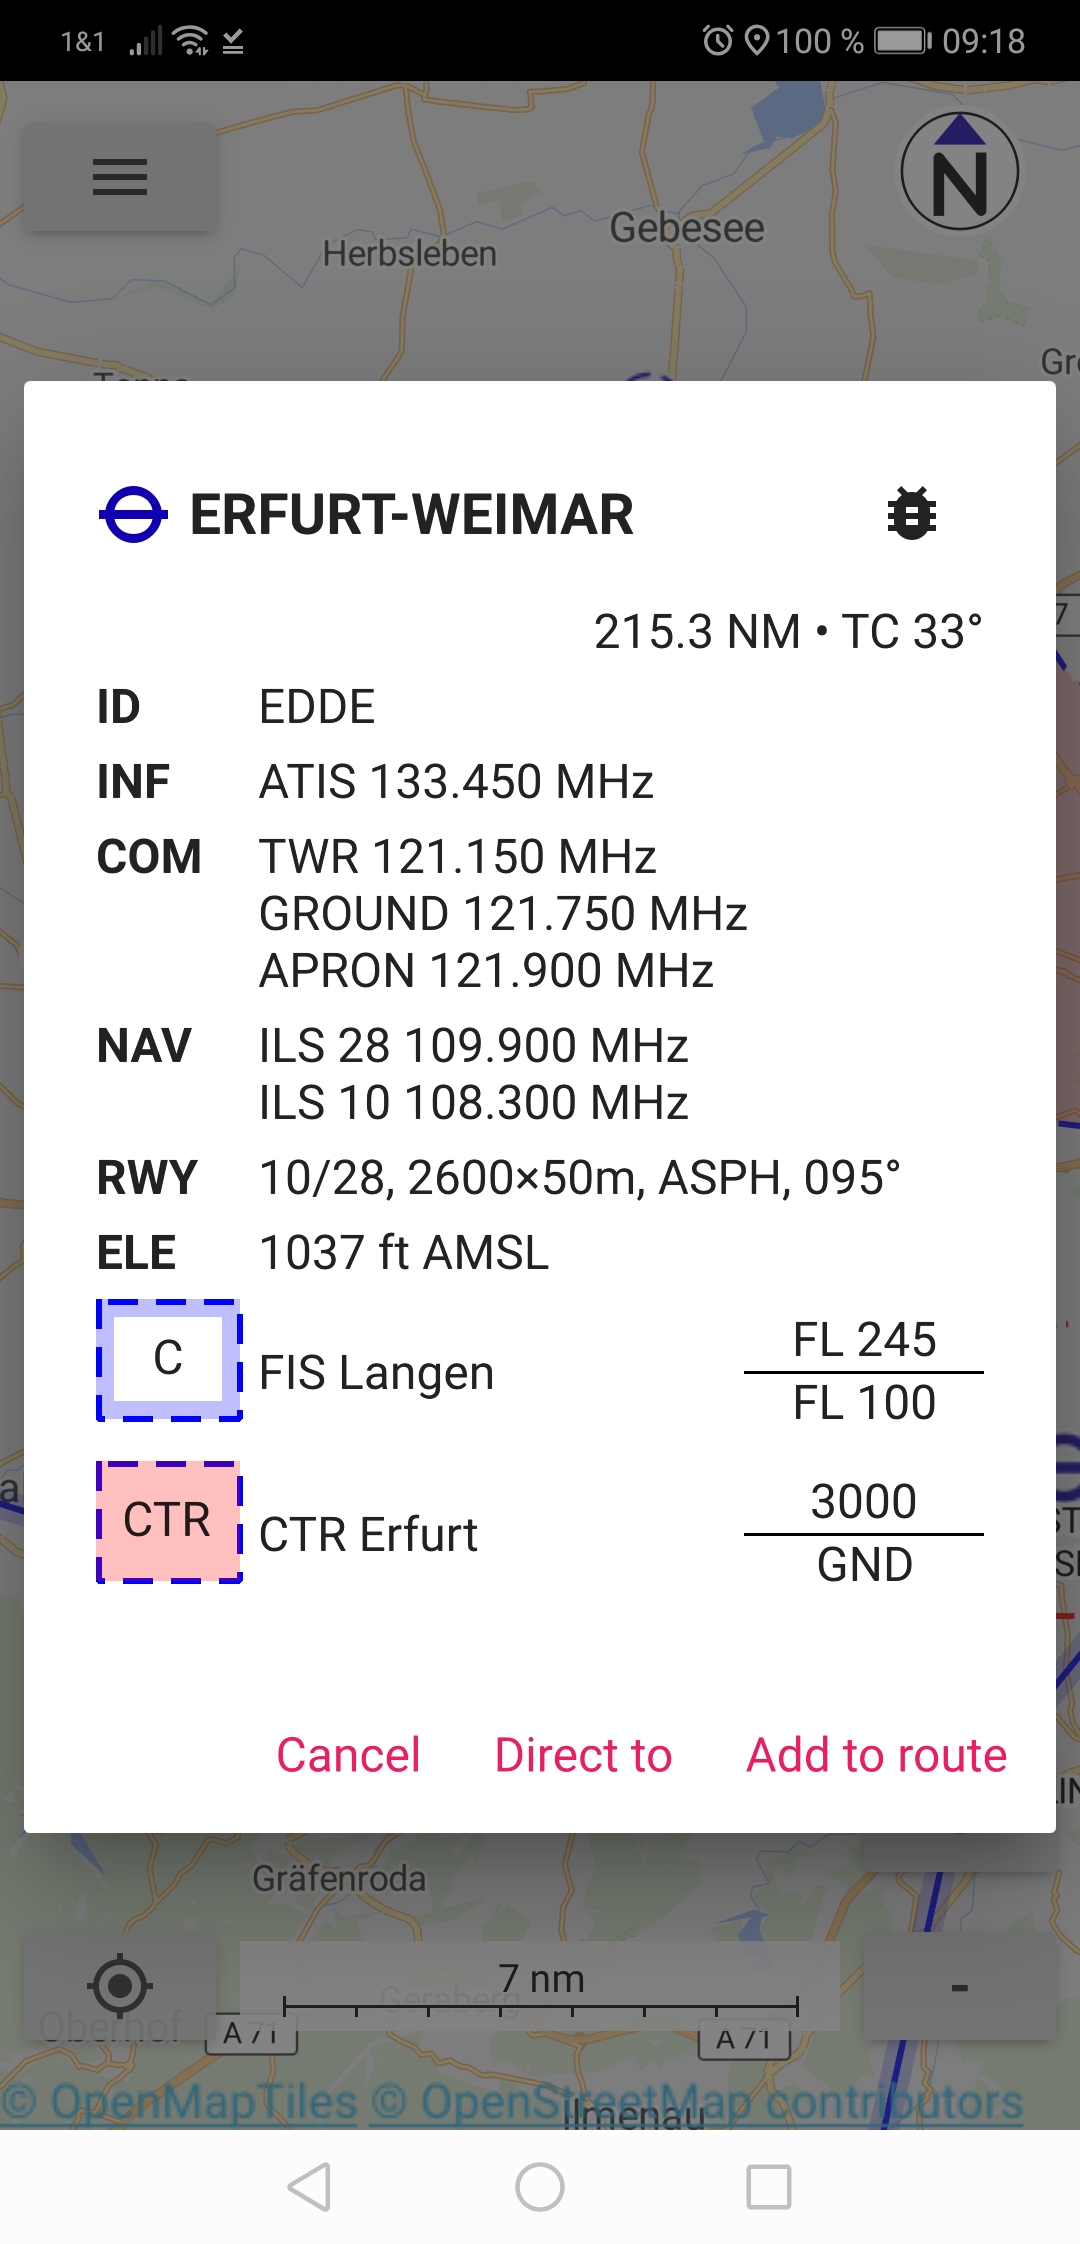 Airfield and Airspace Information